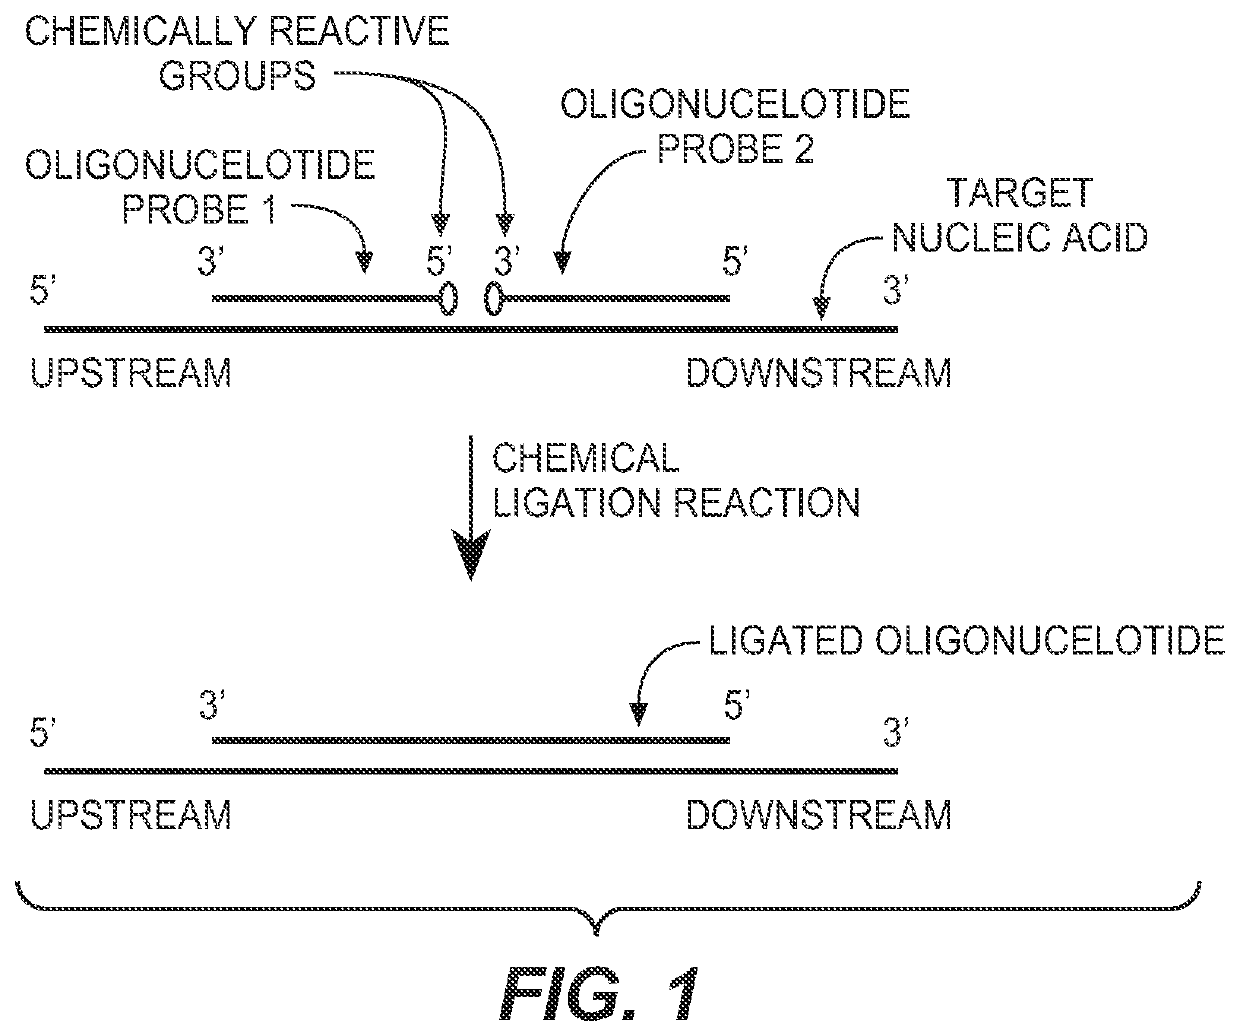 Detection of nucleic acid targets using chemically reactive oligonucleotide probes